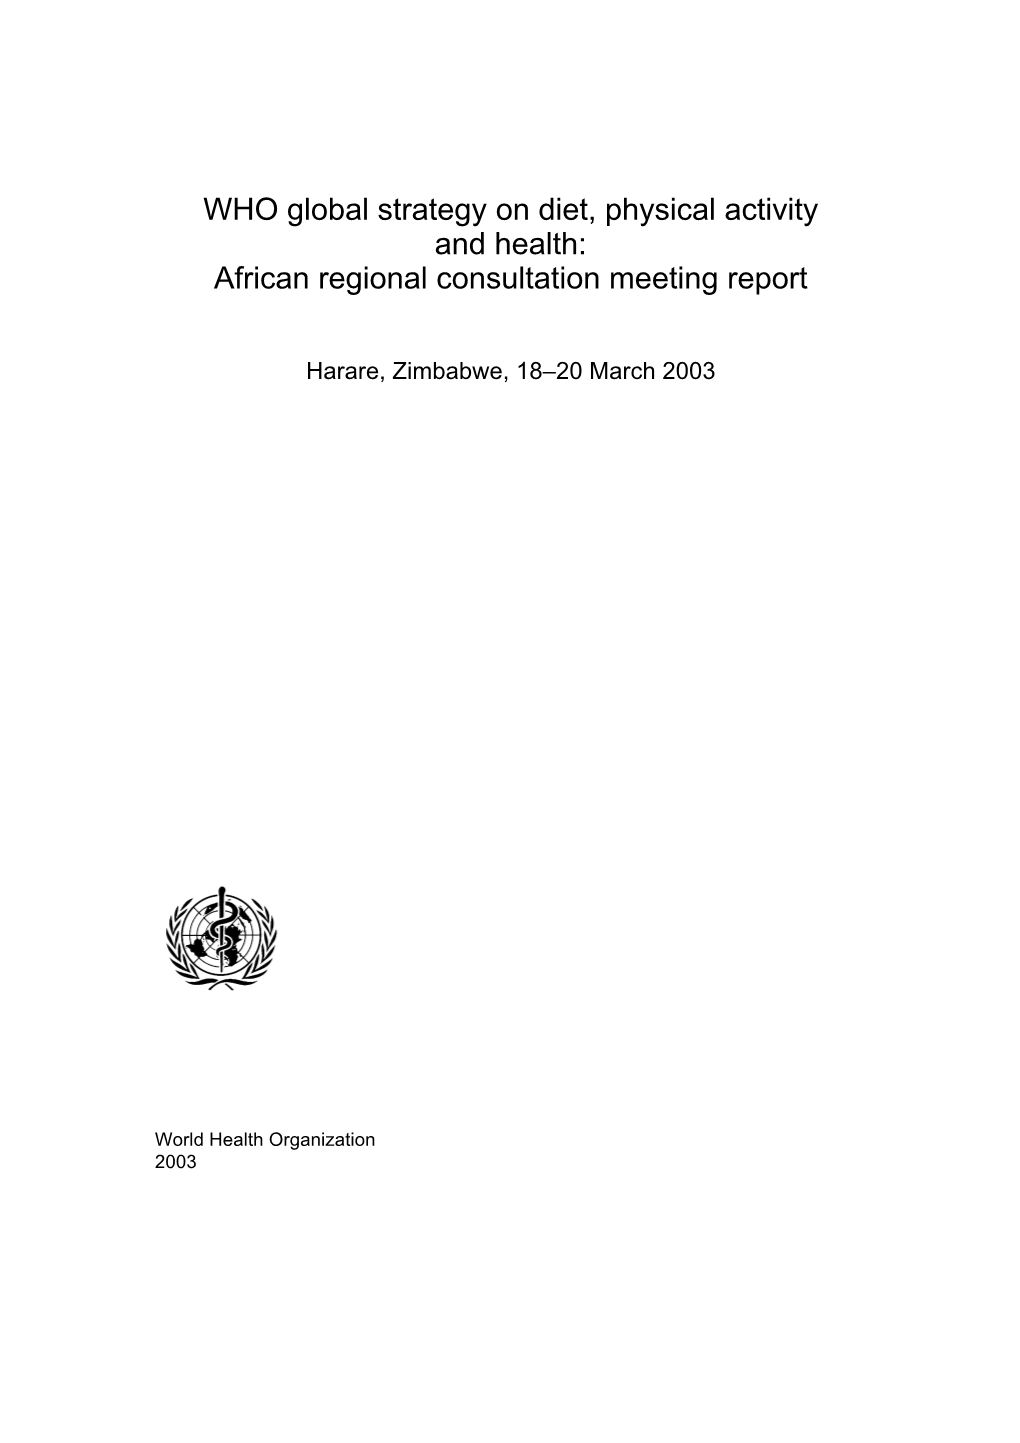 WHO Global Strategy on Diet, Physical Activity and Health: African Regional Consultation Meeting Report